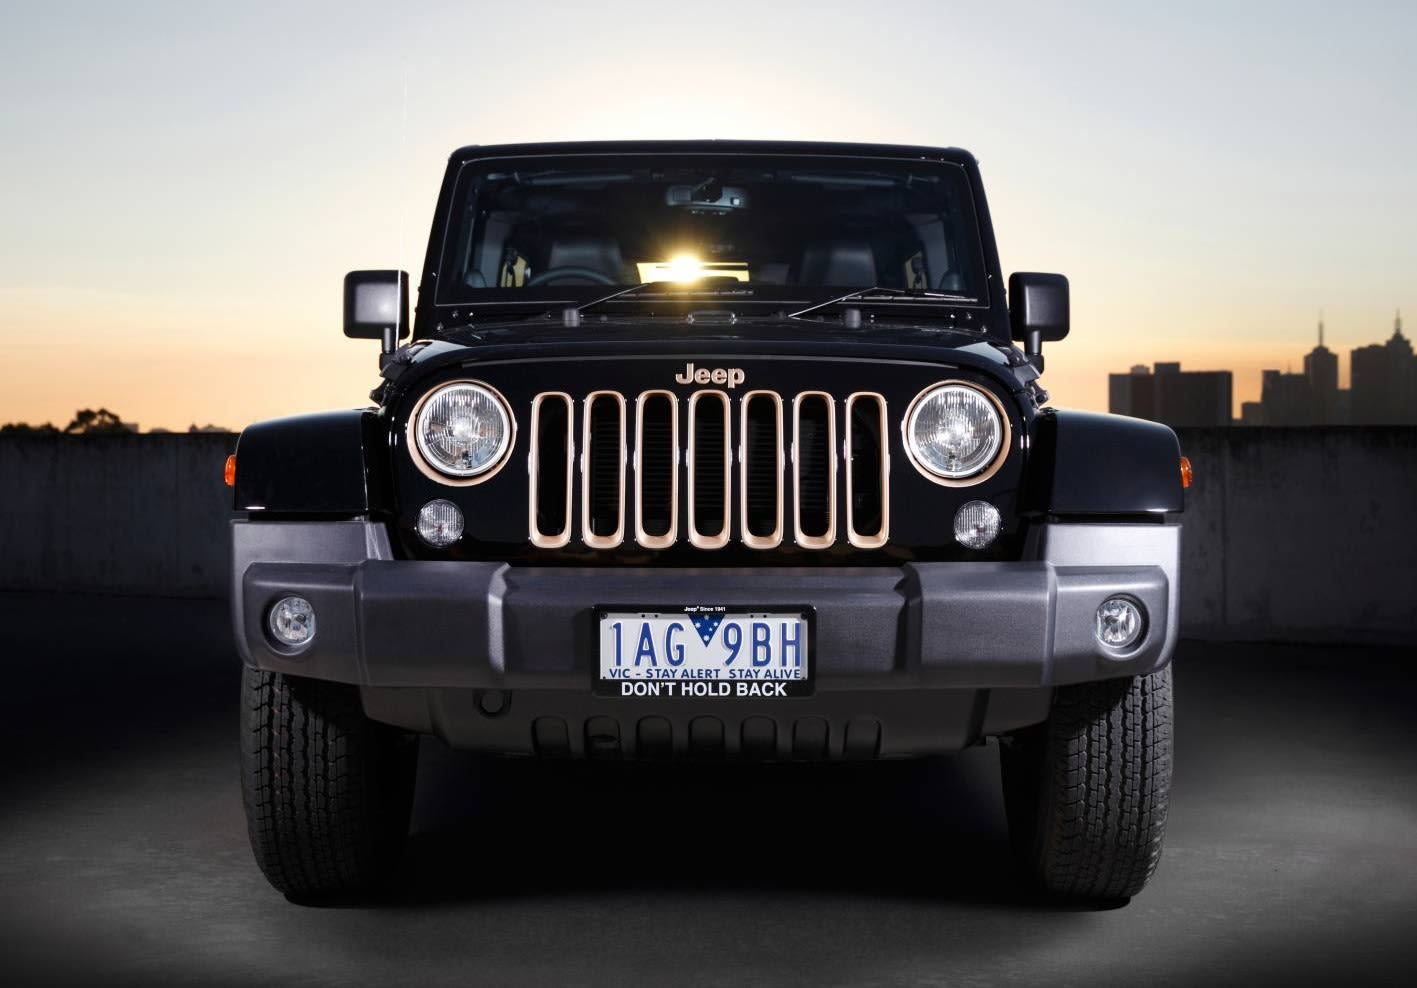 Jeep Wrangler Dragon limited edition launched - Drive